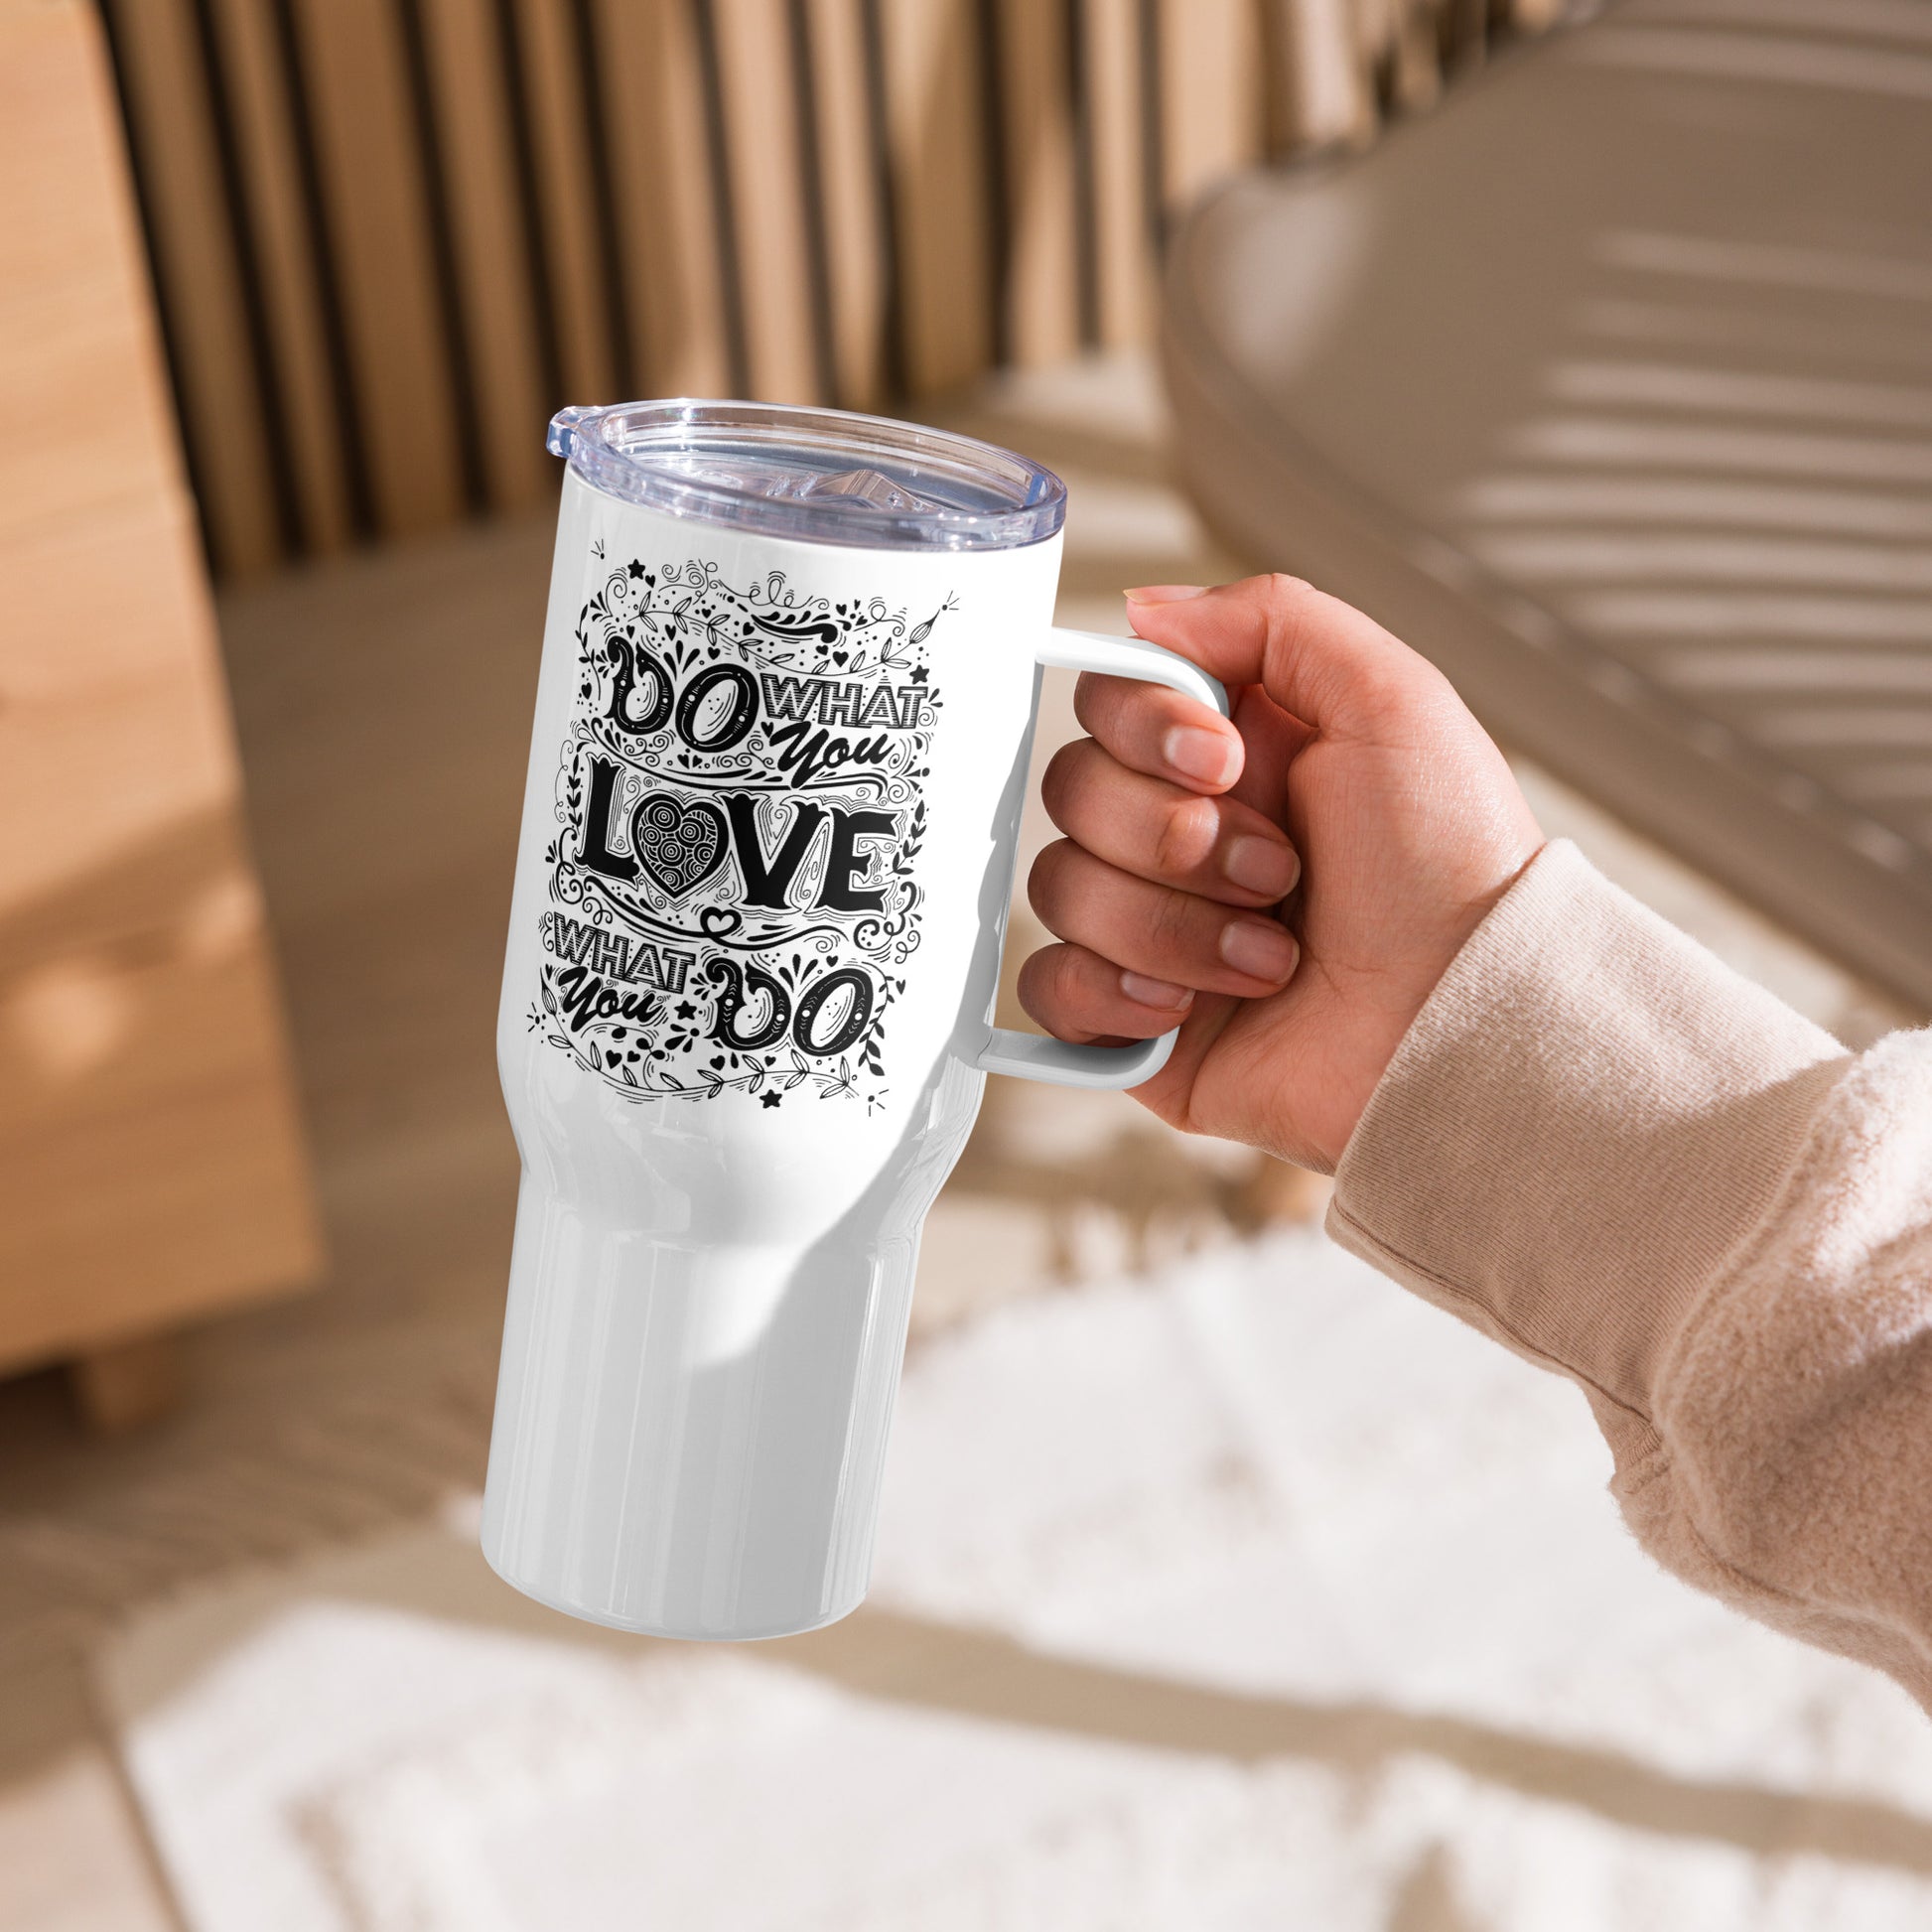 Love what you do Travel mug with a handle CedarHill Country Market